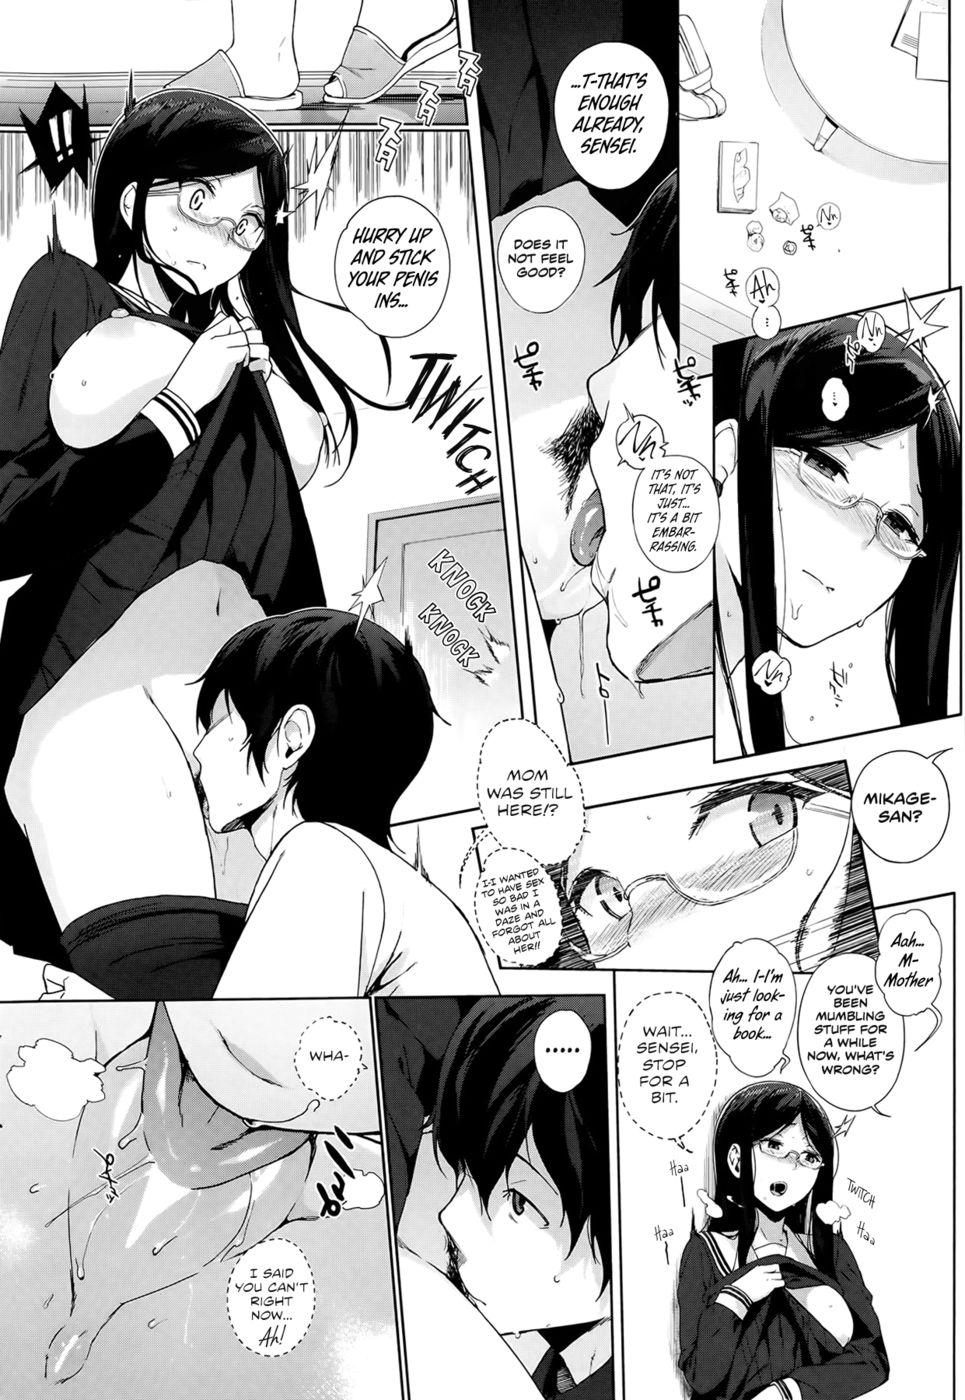 10th Class Sutant Porn - A Class An Honor Student Needs-Read-Hentai Manga Hentai Comic - Page: 10 -  Online porn video at mobile